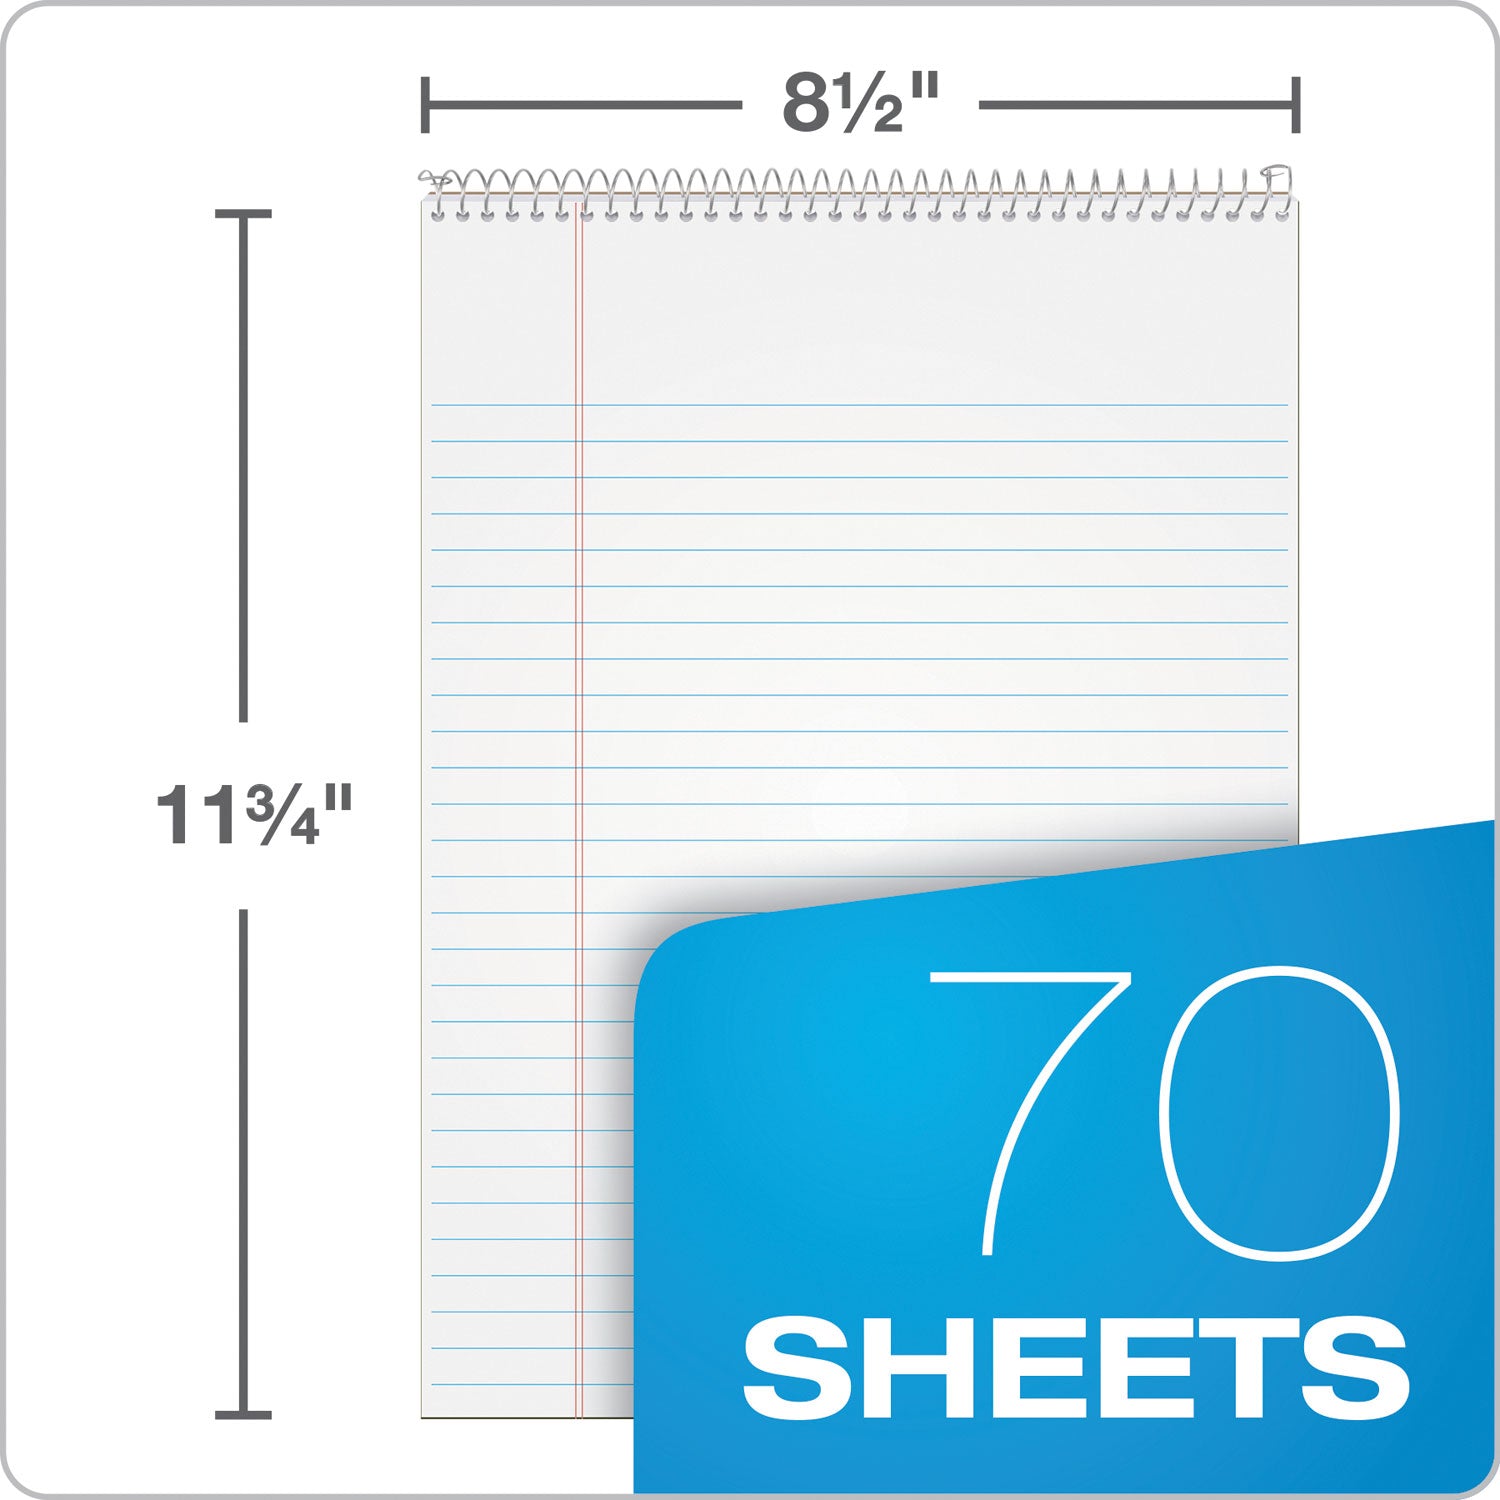 Docket Ruled Wirebound Pad with Cover, Wide/Legal Rule, Blue Cover, 70 White 8.5 x 11.75 Sheets - 